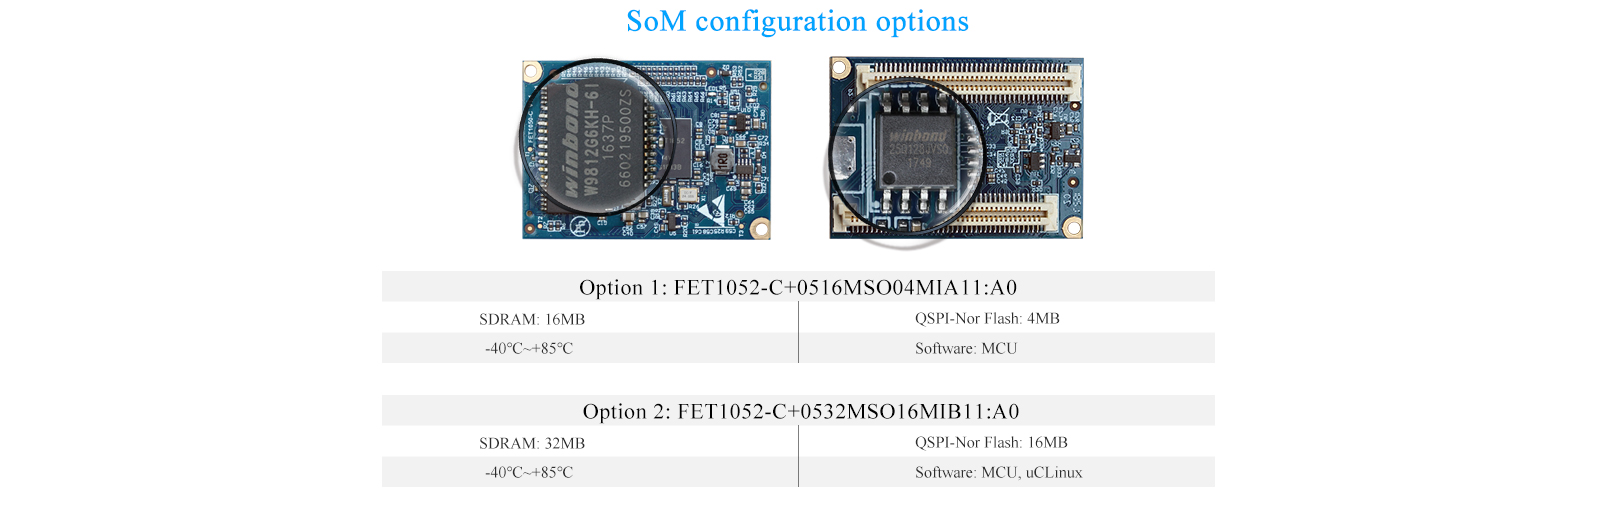 iMXRT1052 system on module/Single Board Computer configuration options